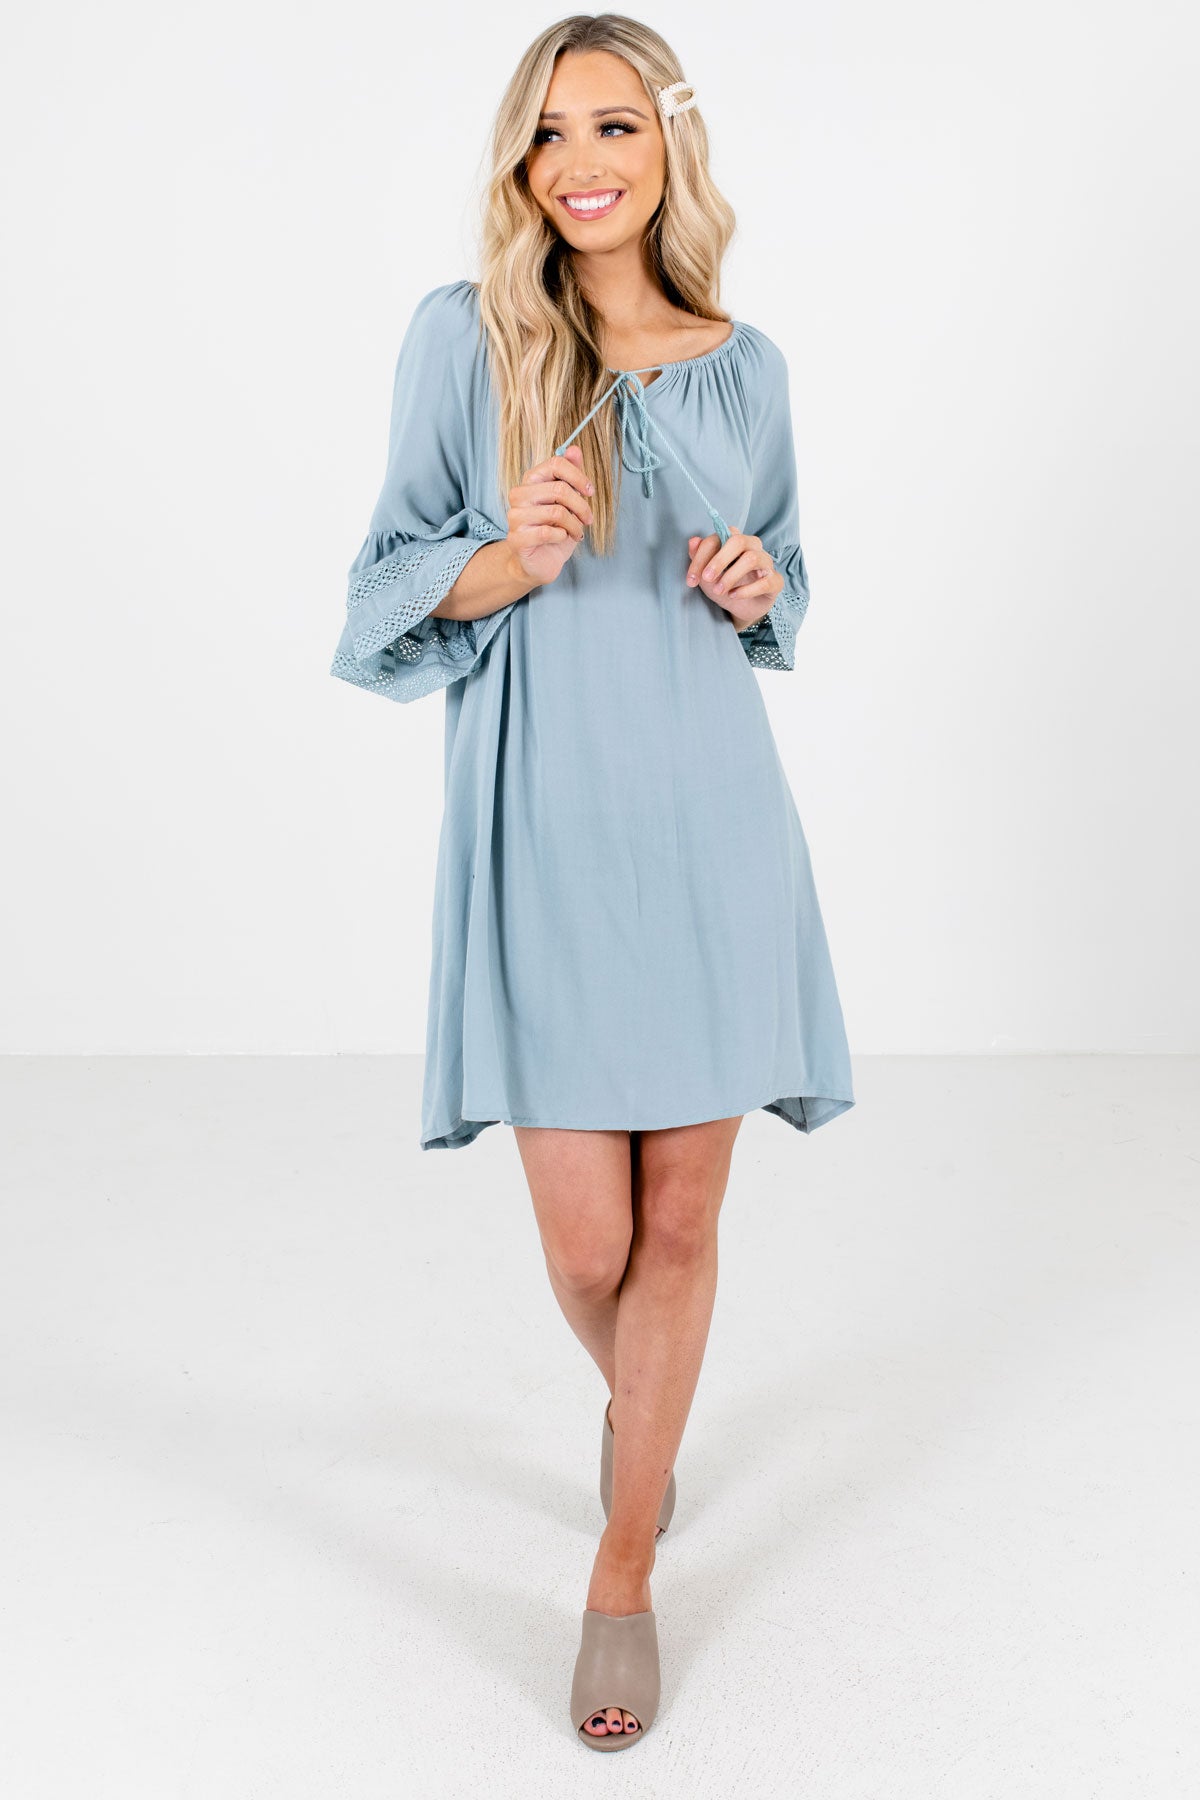 Women's Blue Spring and Summertime Boutique Mini Dress